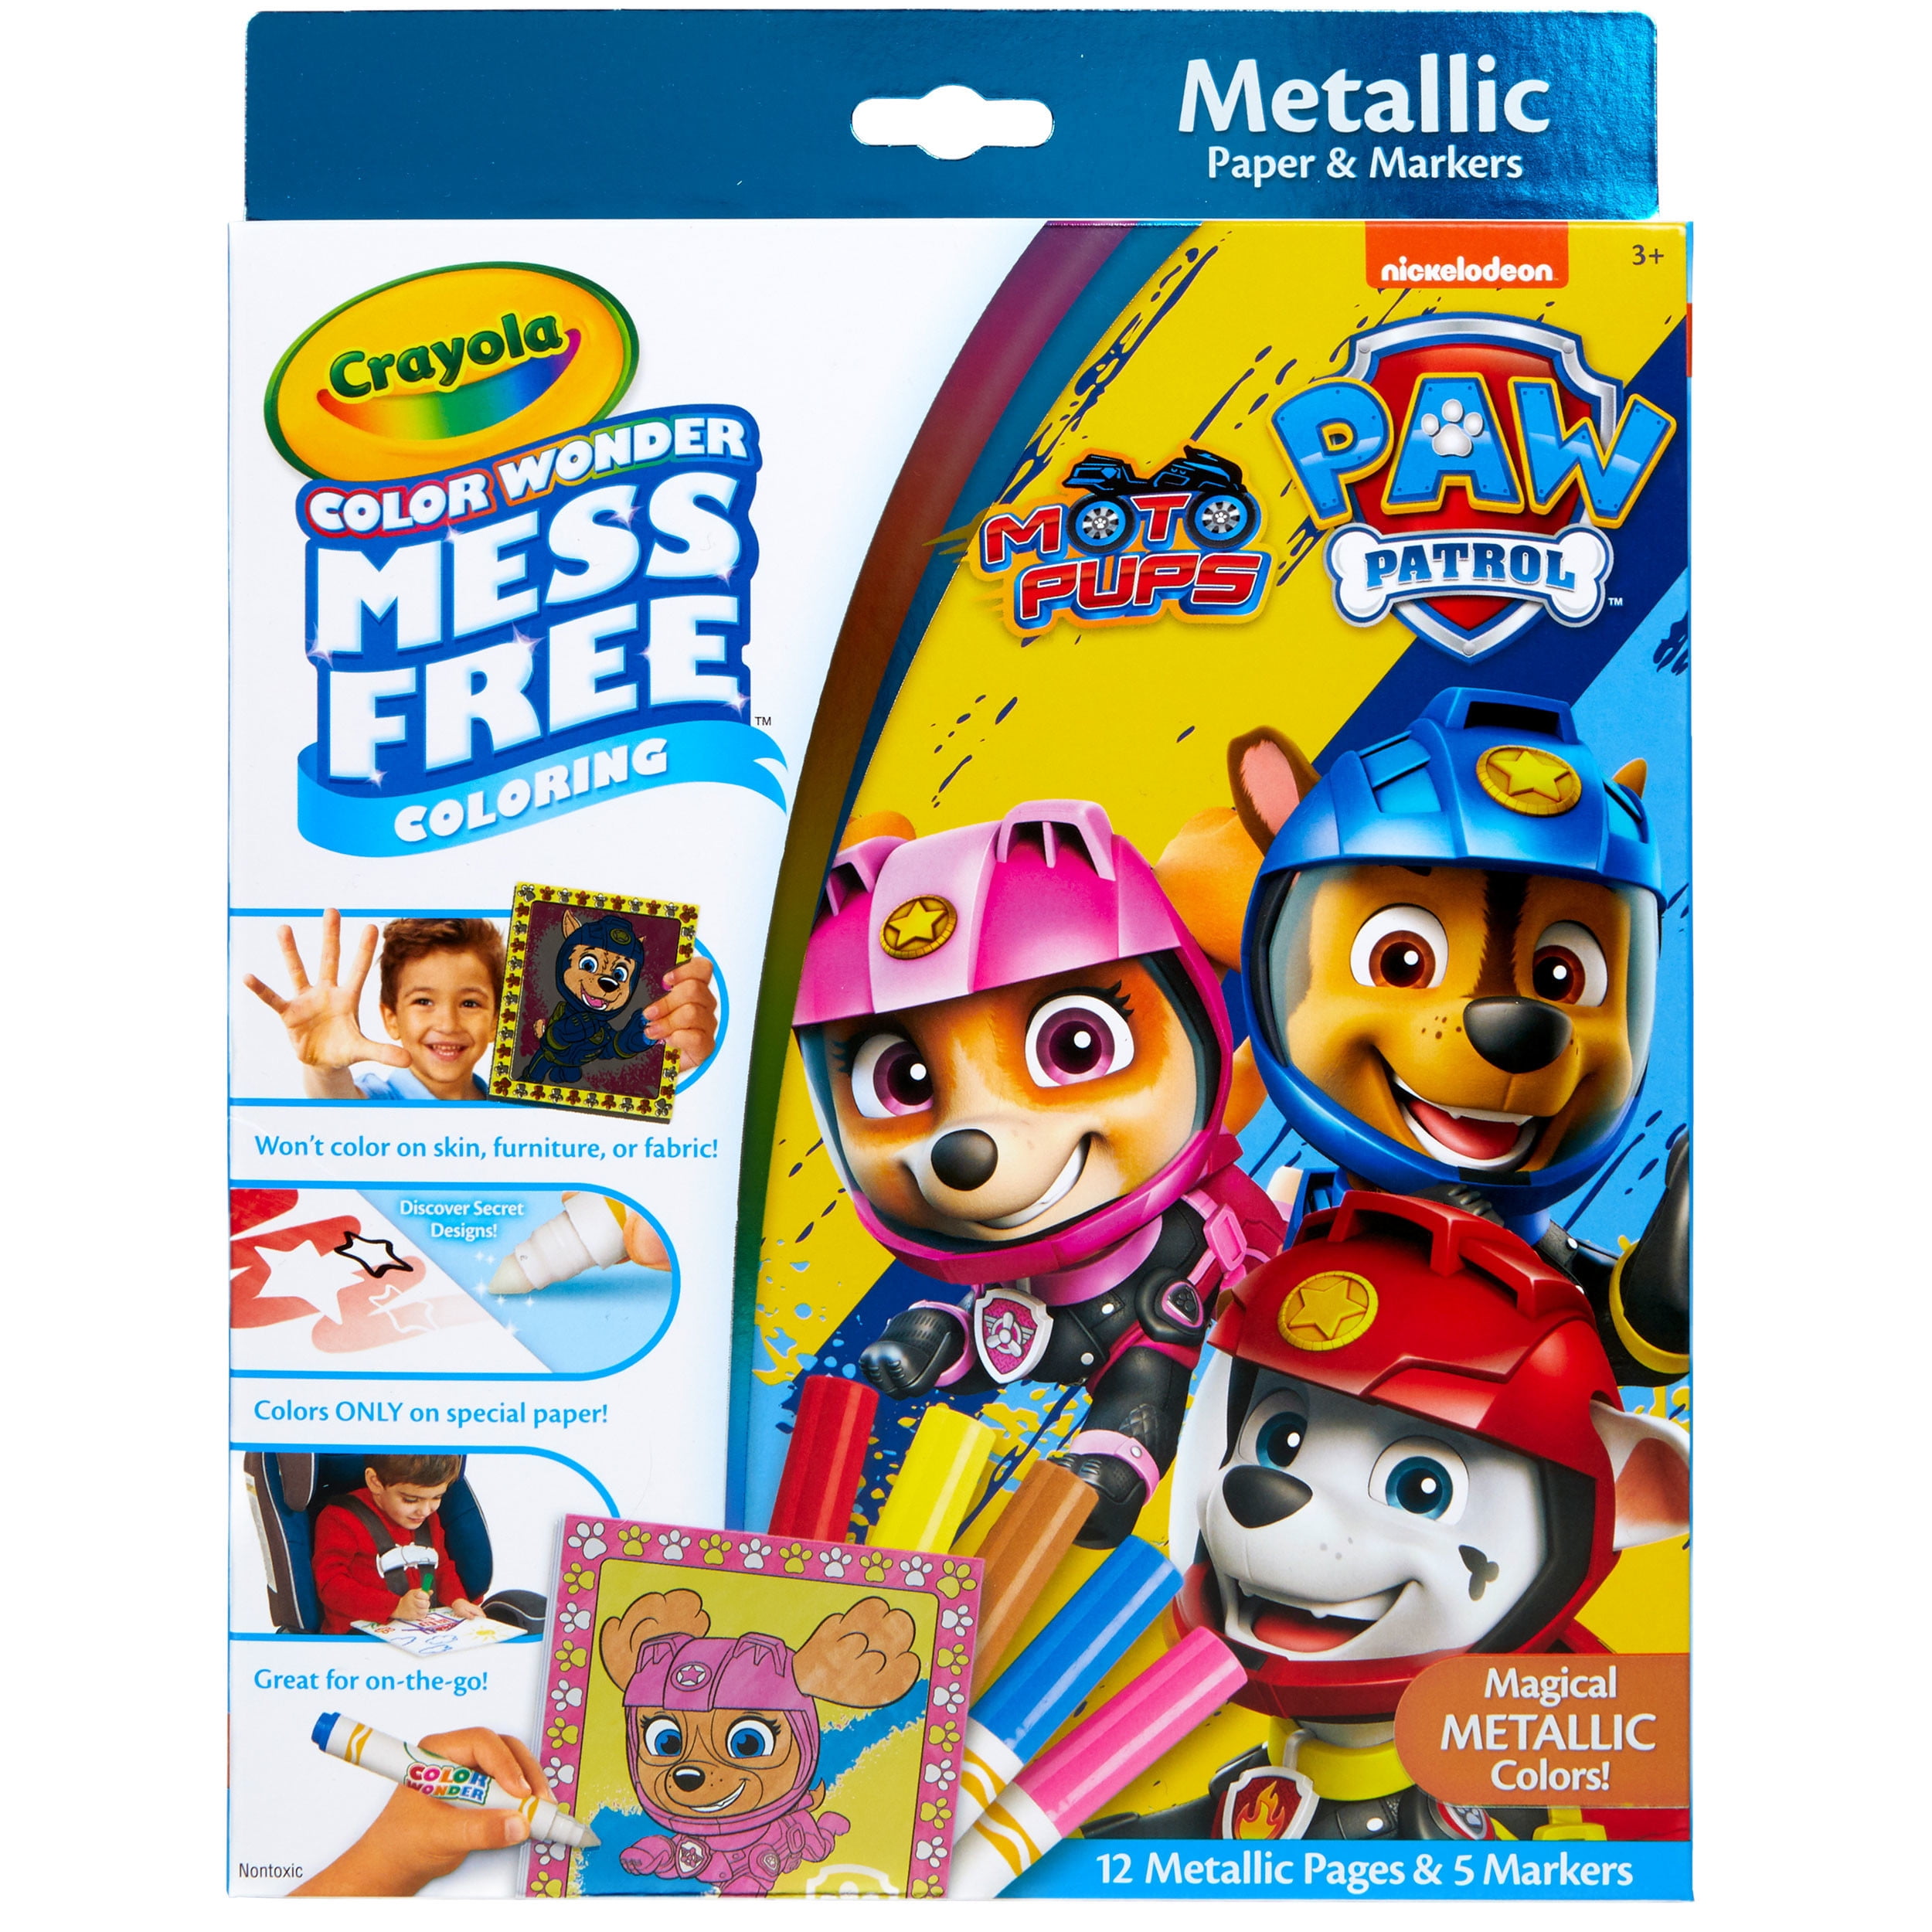 Crayola Paw Patrol Color Wonder Metallic Mess Free Coloring Set, 12 Pages, Gift for Kids, Ages 3+